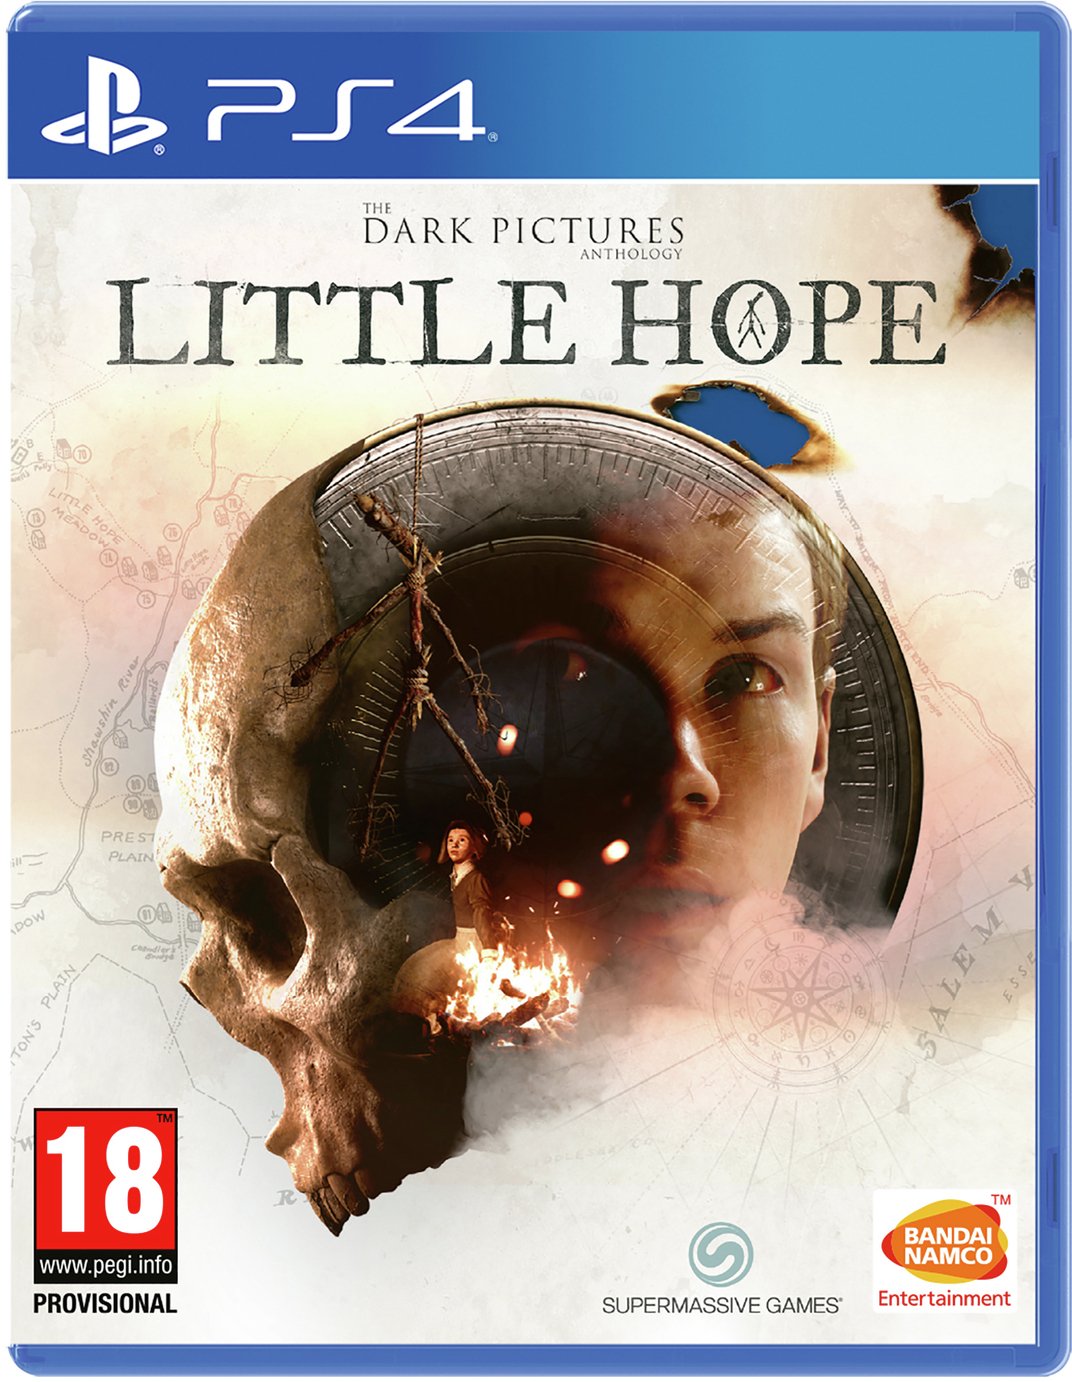 Dark Pictures: Little Hope PS4 Game Pre-Order Review